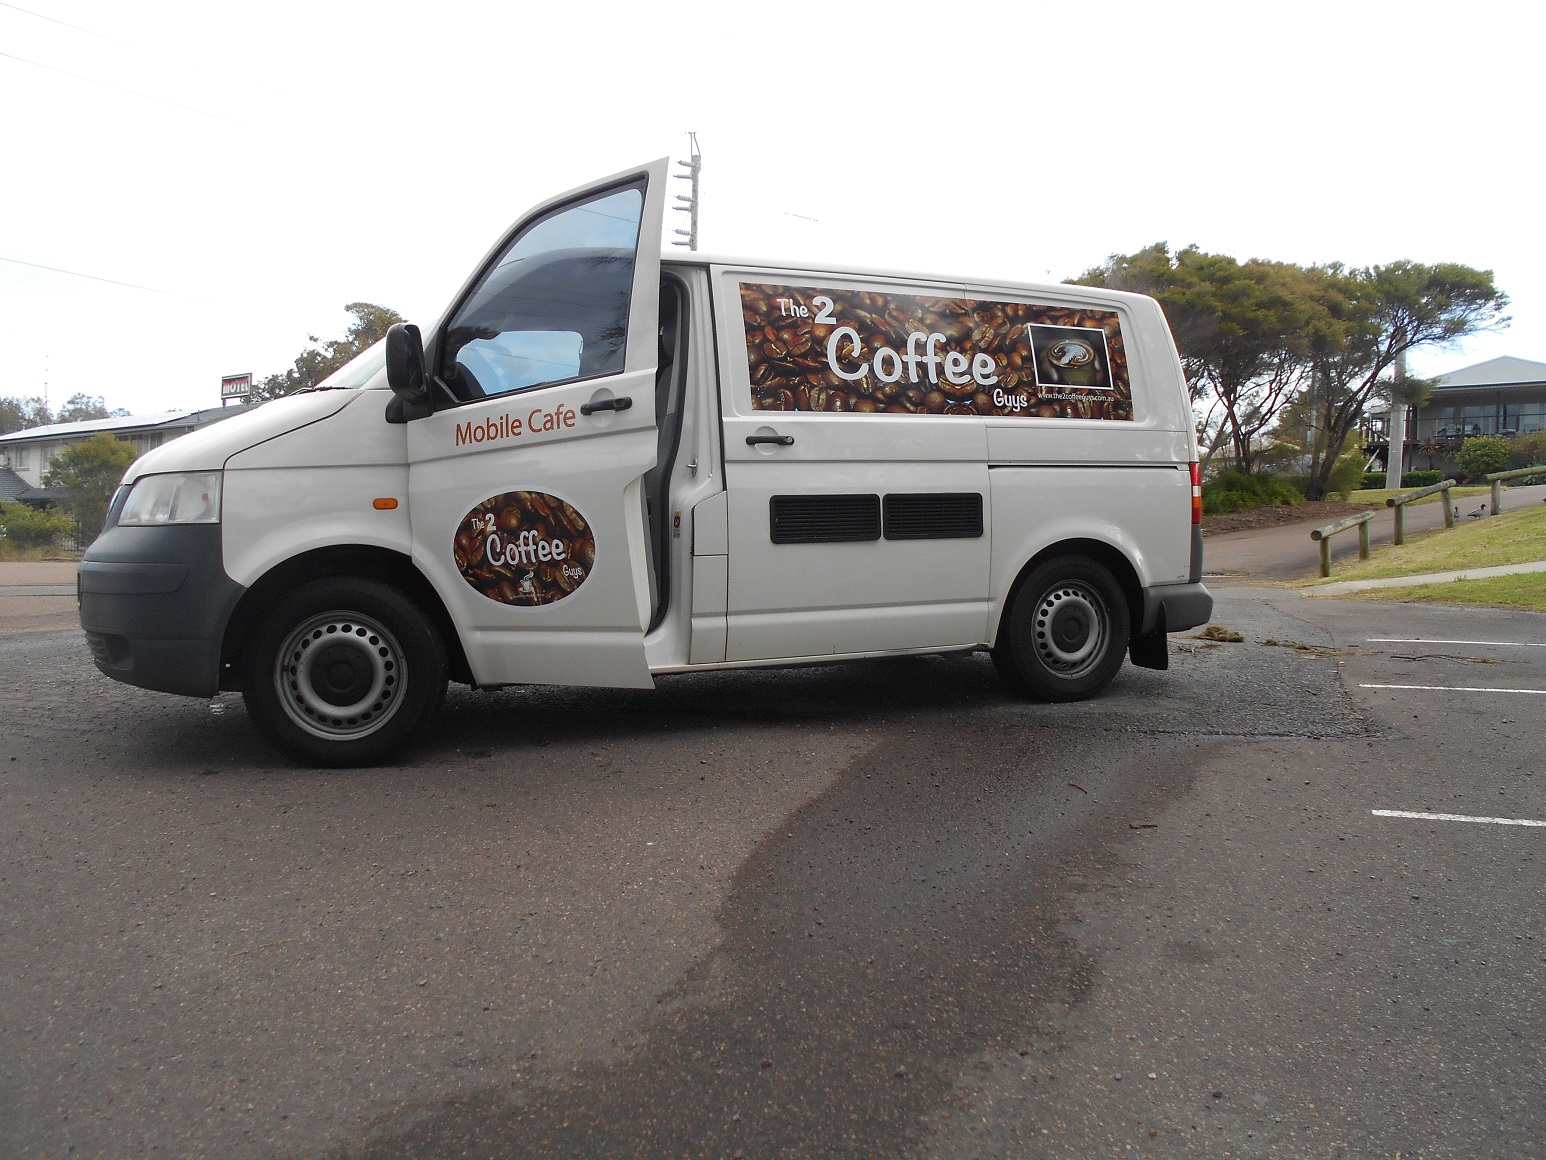 Our Coffee Vans | The 2 Coffee Guys